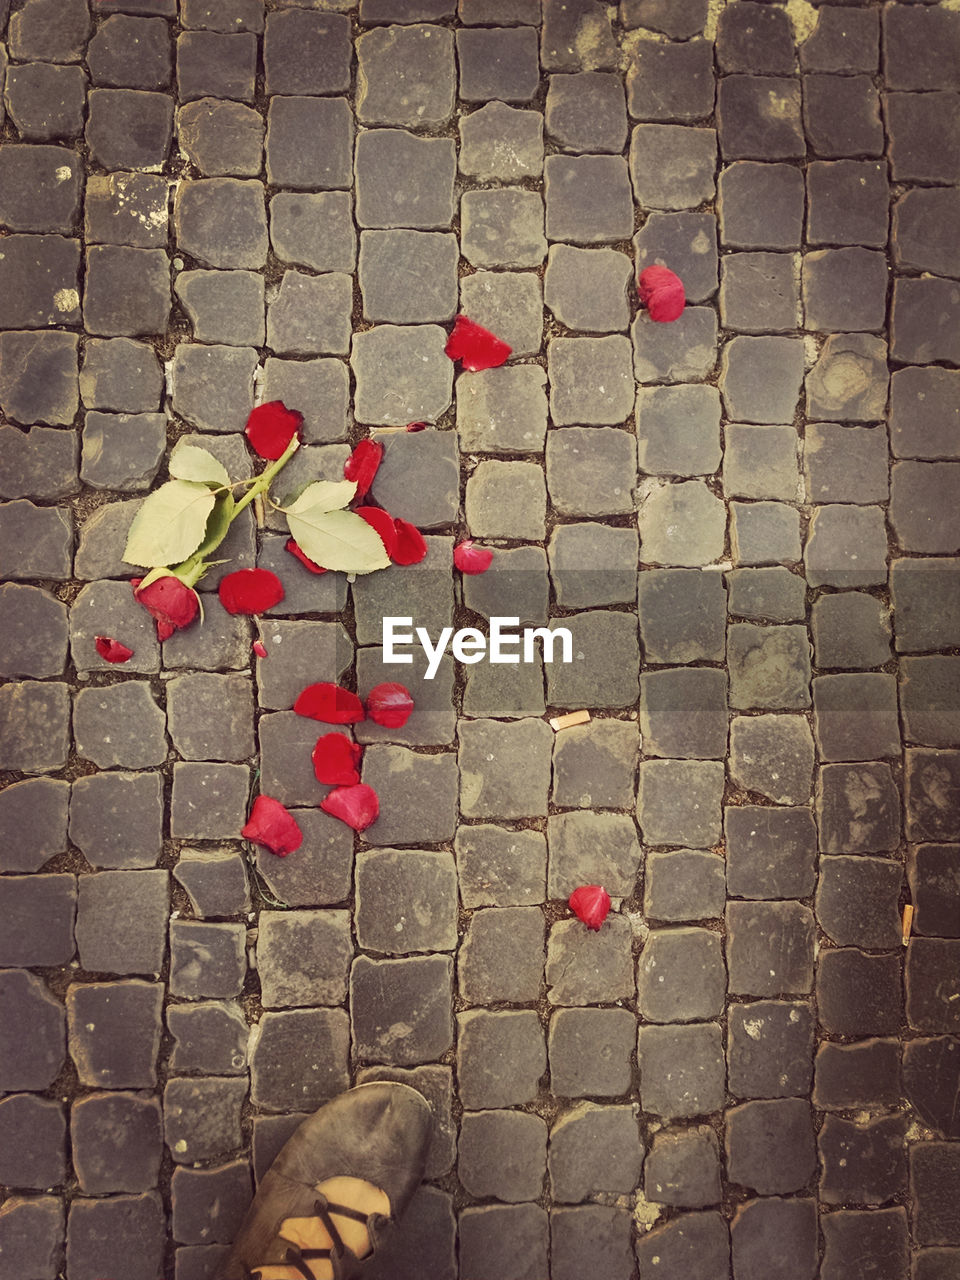 LOW SECTION OF PERSON WITH RED FLOWER ON COBBLESTONE